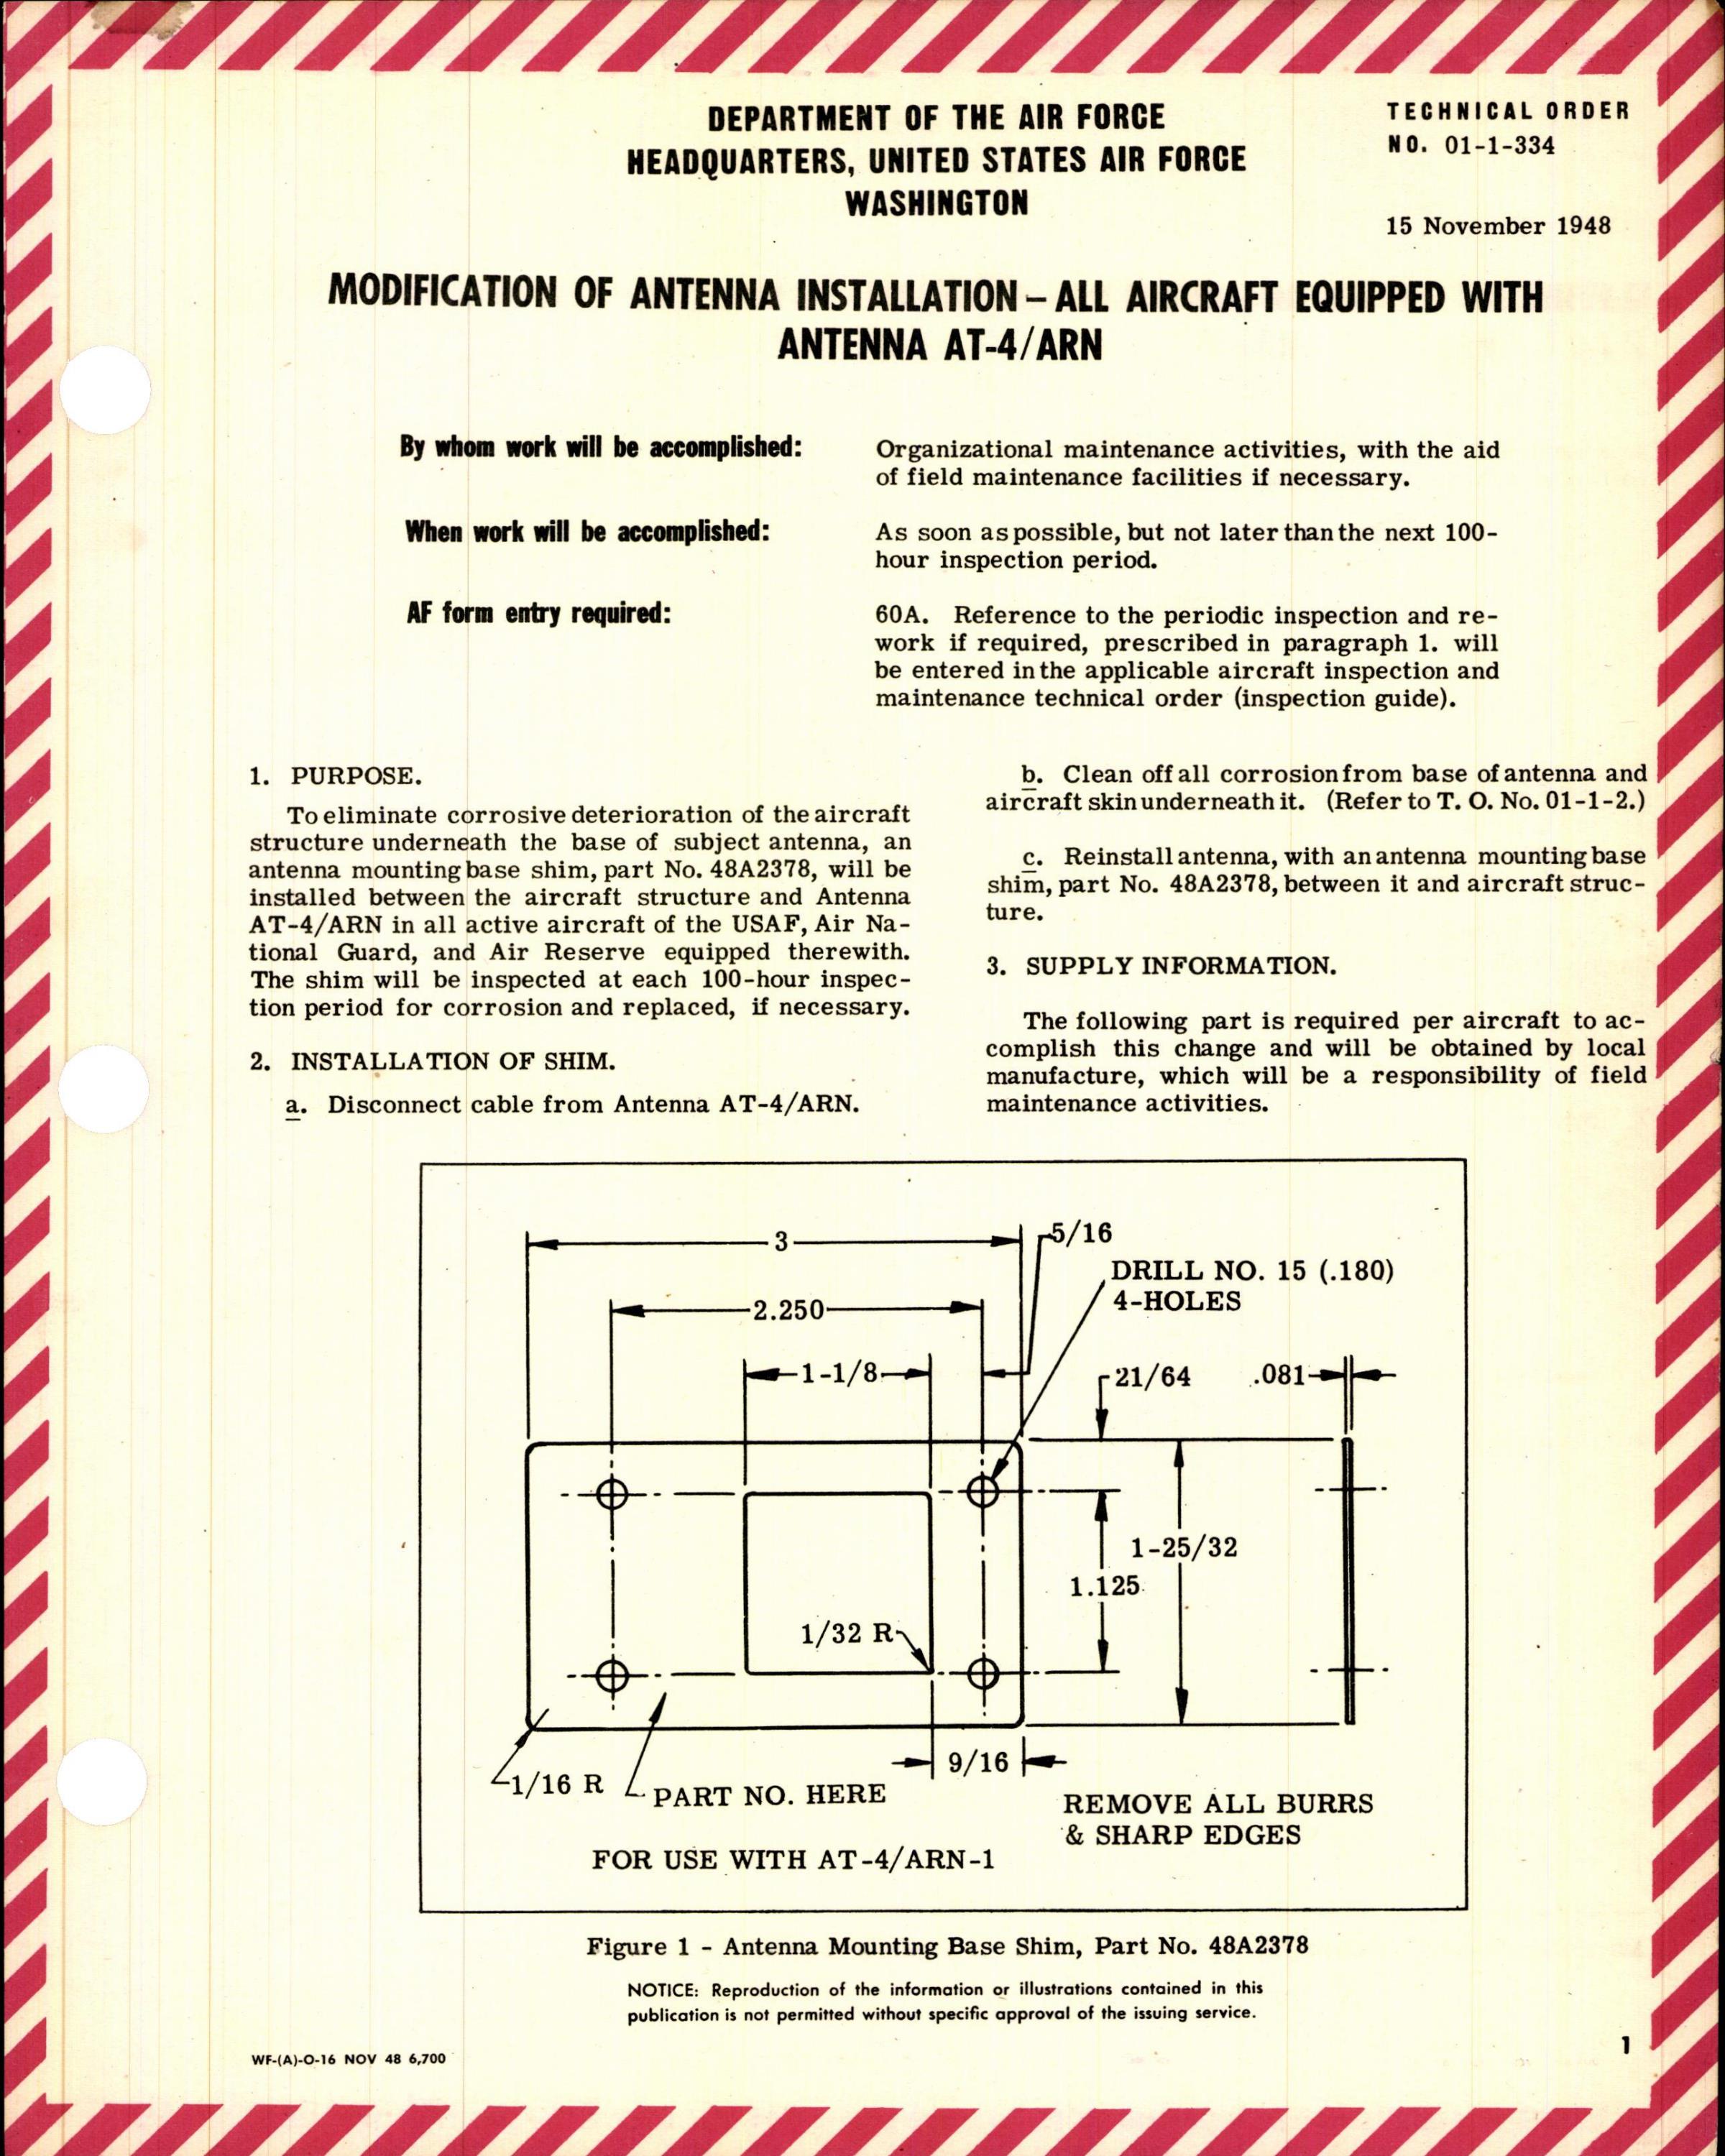 Sample page 1 from AirCorps Library document: Modification of Antenna Installation for all Aircraft Equipped with Antenna AT-4/ARN